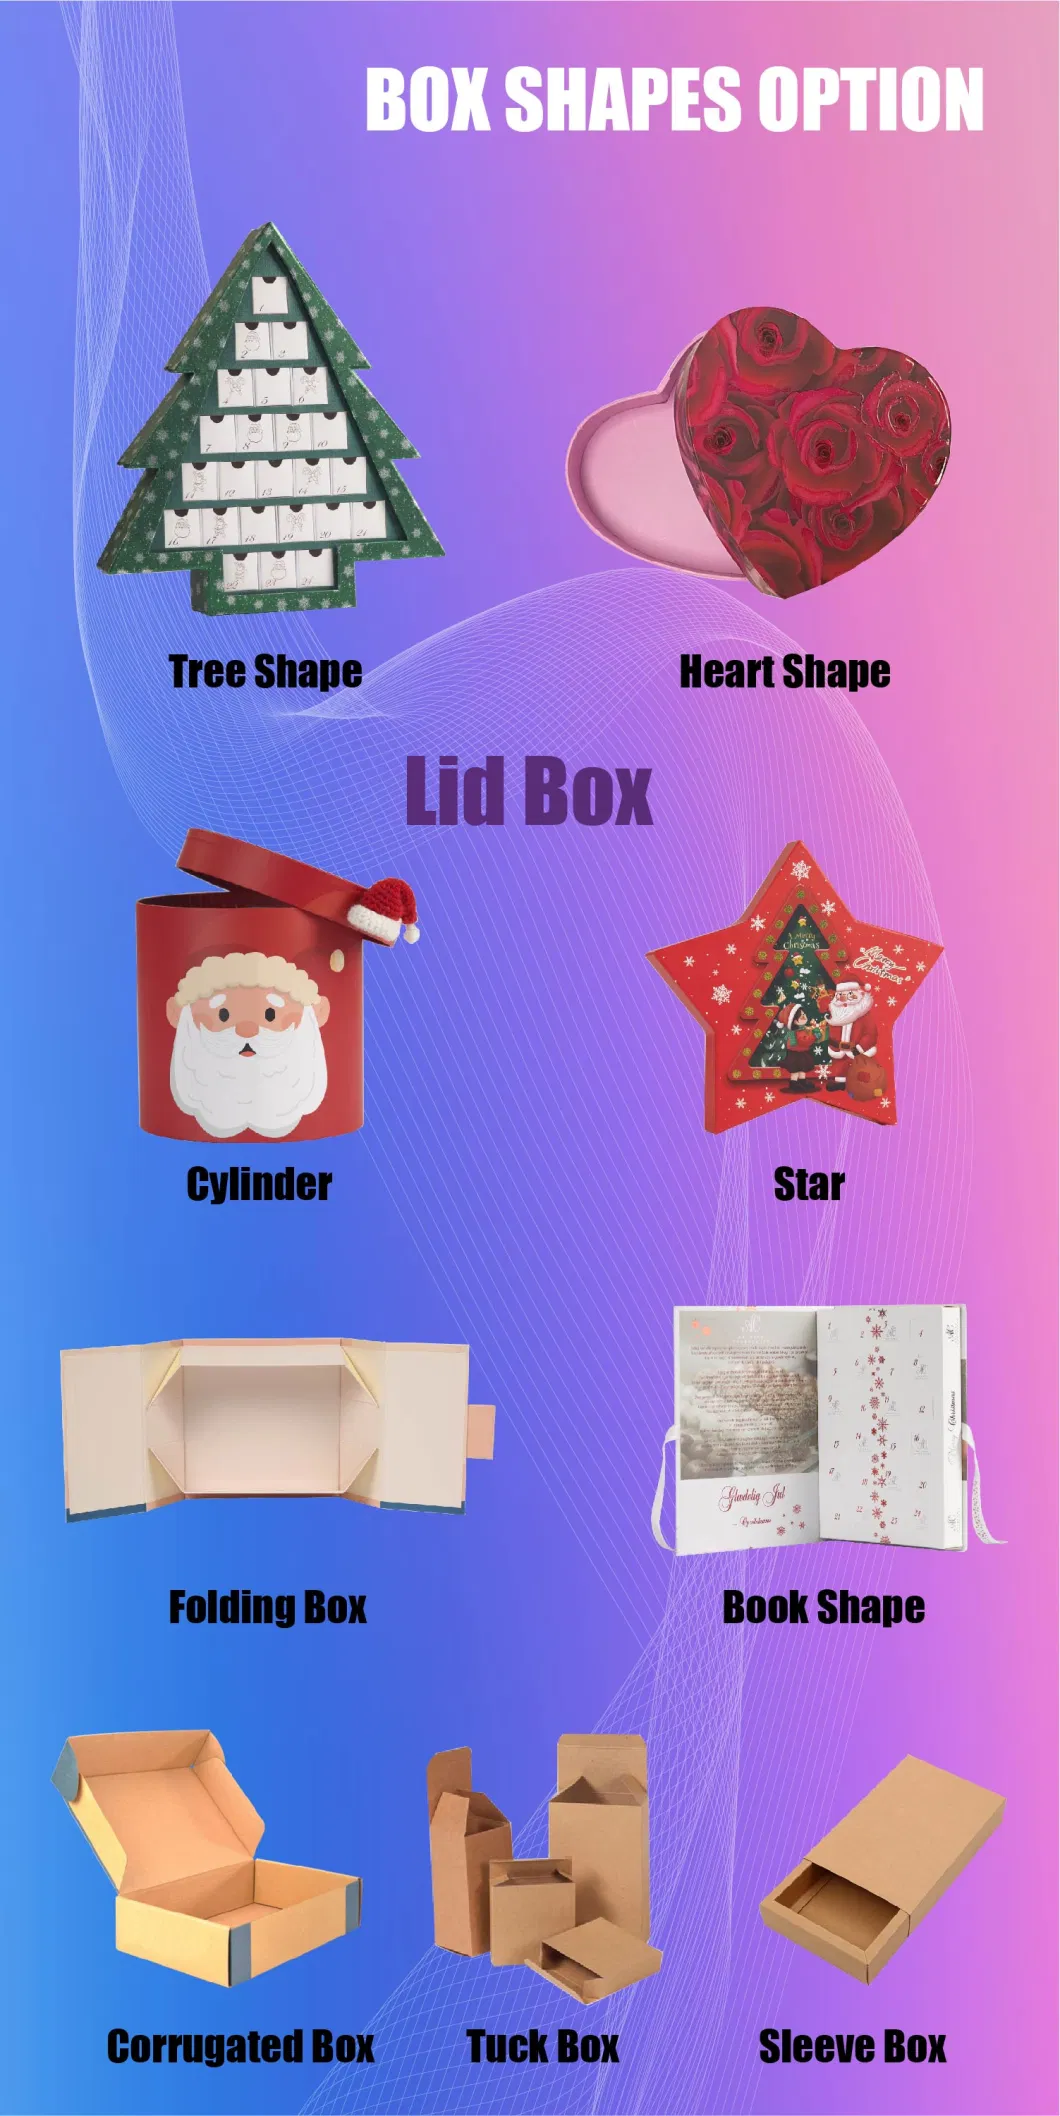 Holiday Gift Packaging Paper Gift Boxes Chocolate Packaging Irregular Shape Boxes Truffles Take Away Container Party Favor Goodie Bag Treat Box